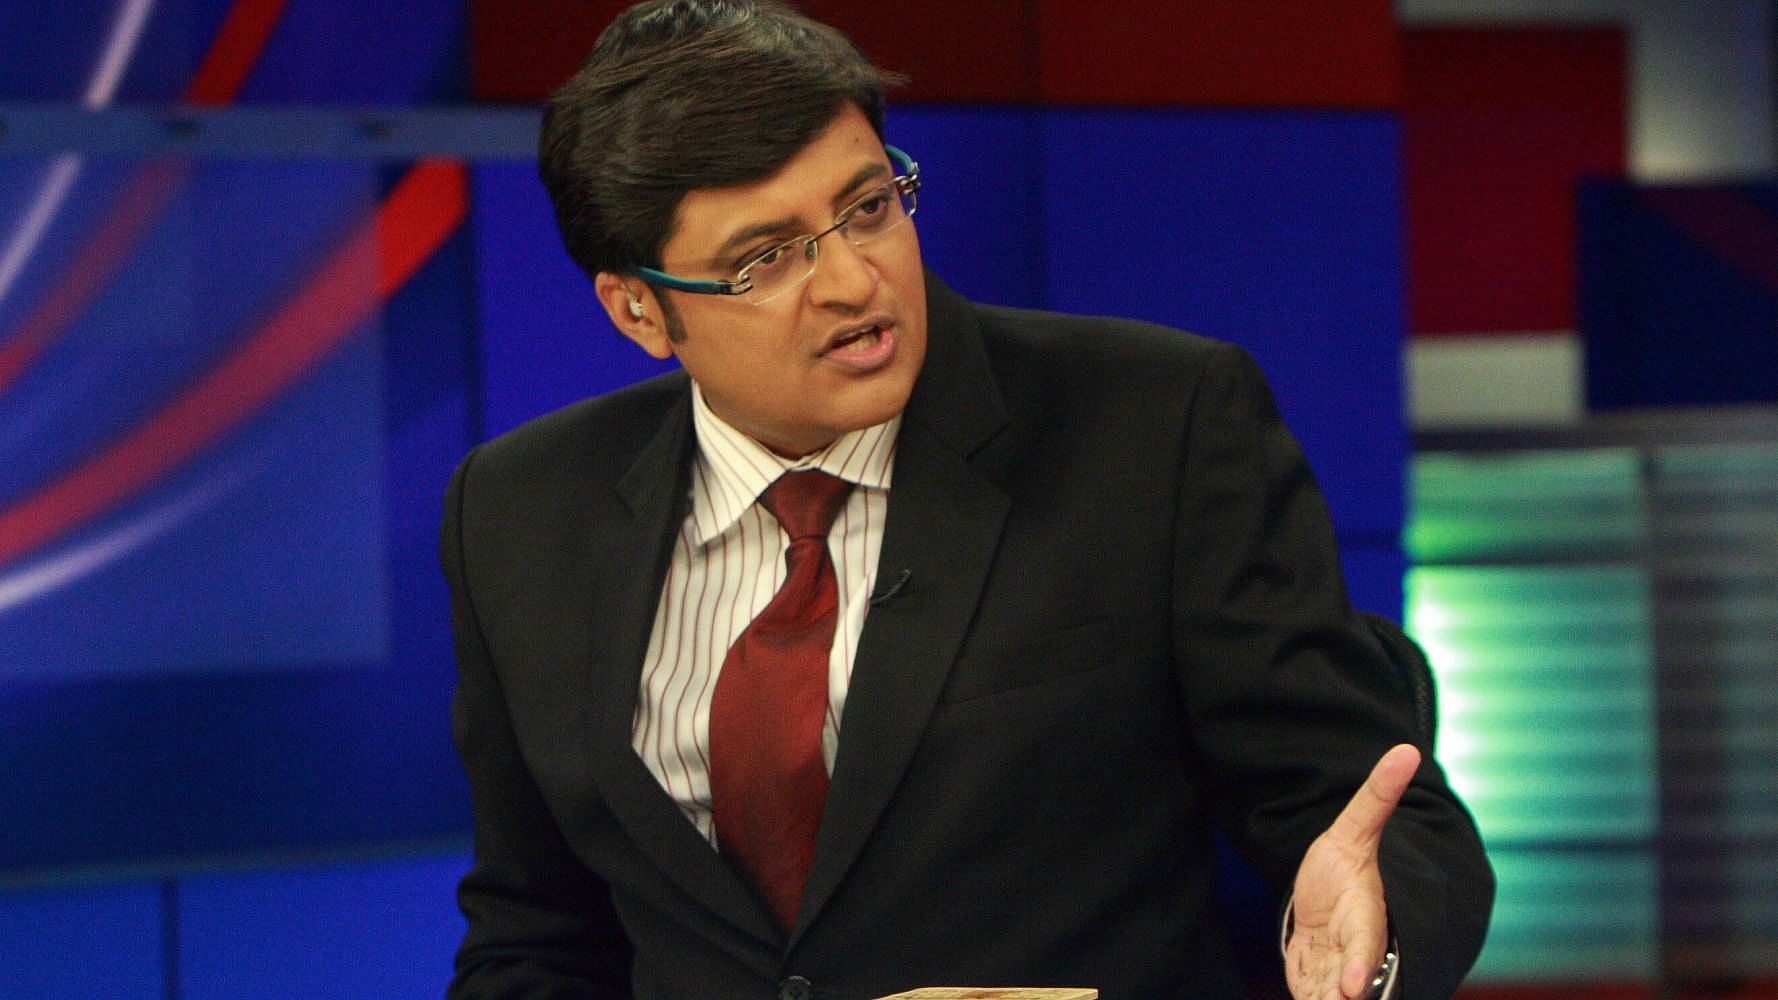 Arnab Goswami, the founding member of Republic TV, announced his resignation from the Editors’ Guild of India.